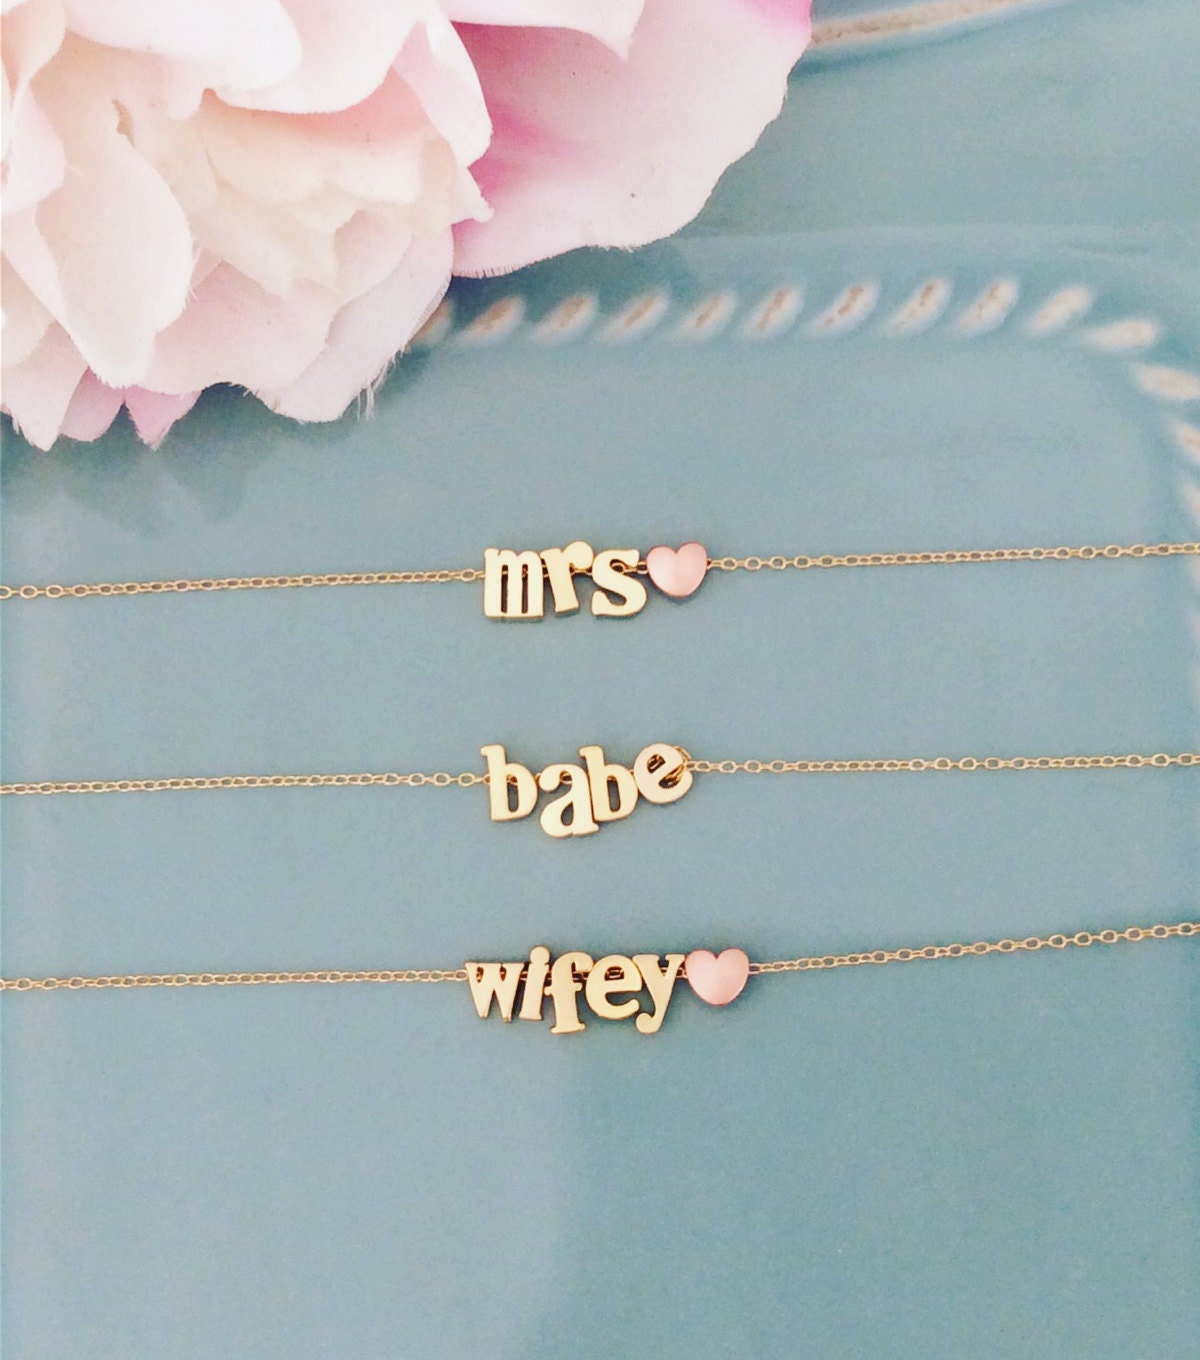 Personalized Gift, name necklace, Gold Necklace, best seller, mrs necklace, wifey necklace, babe necklace, shower gift, bridal gift birthday